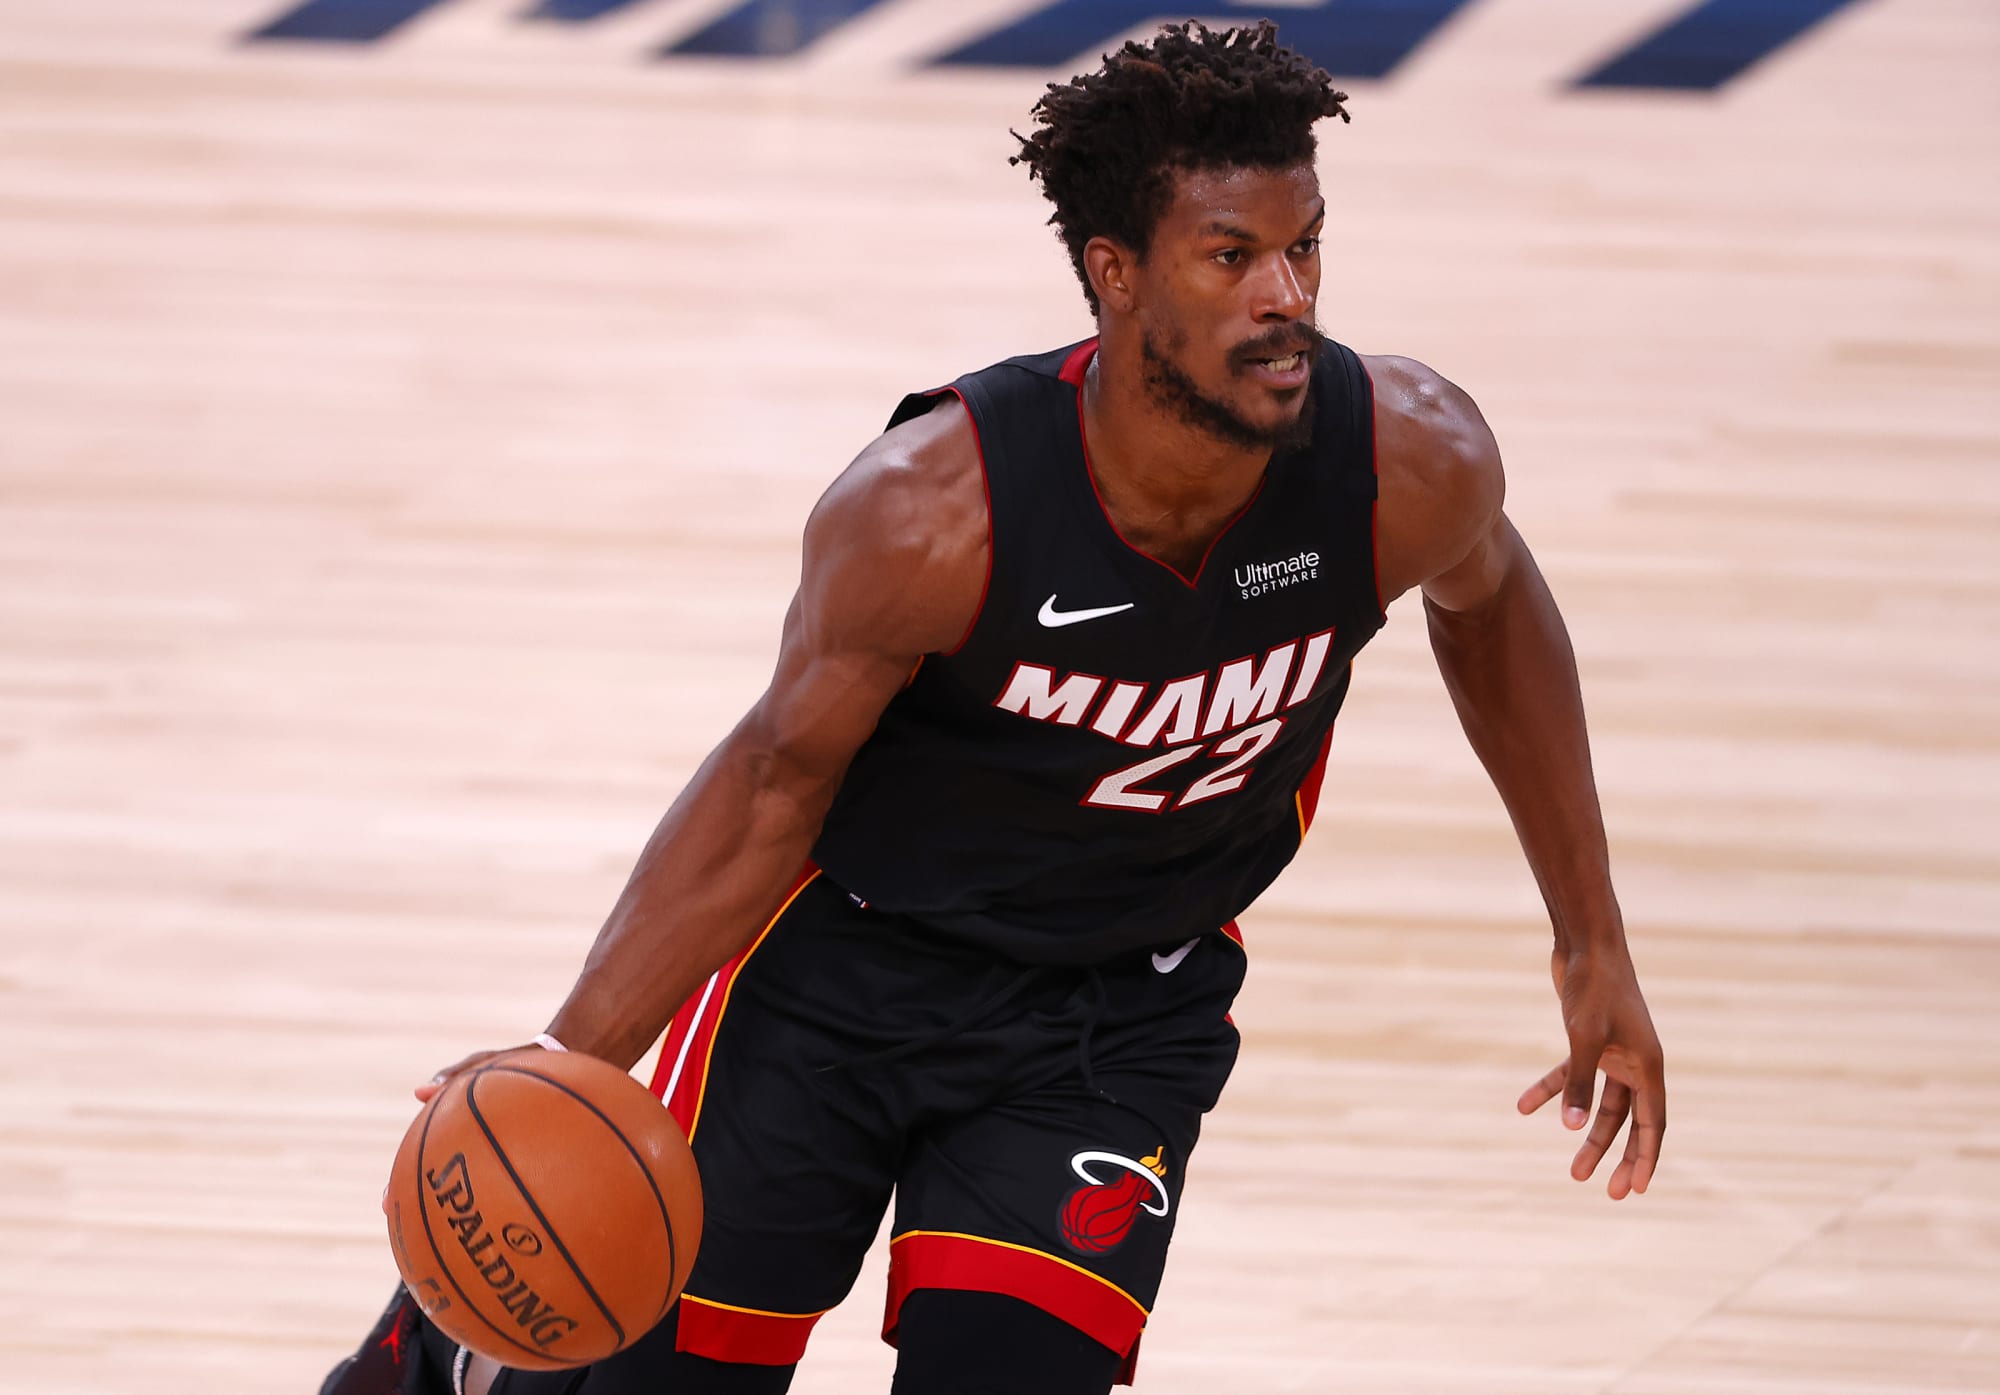 NBA Playoffs - Jimmy Butler and the Miami Heat are in a barista